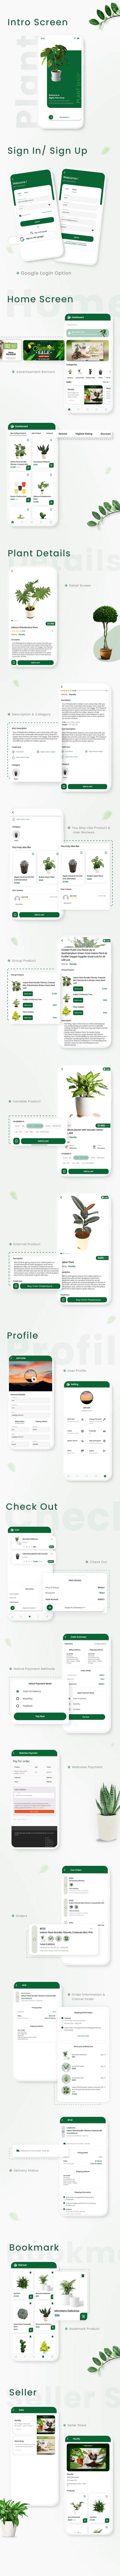 Mighty Plant Shop - Flutter Full App for Nurseries with WooCommerce backend - 7